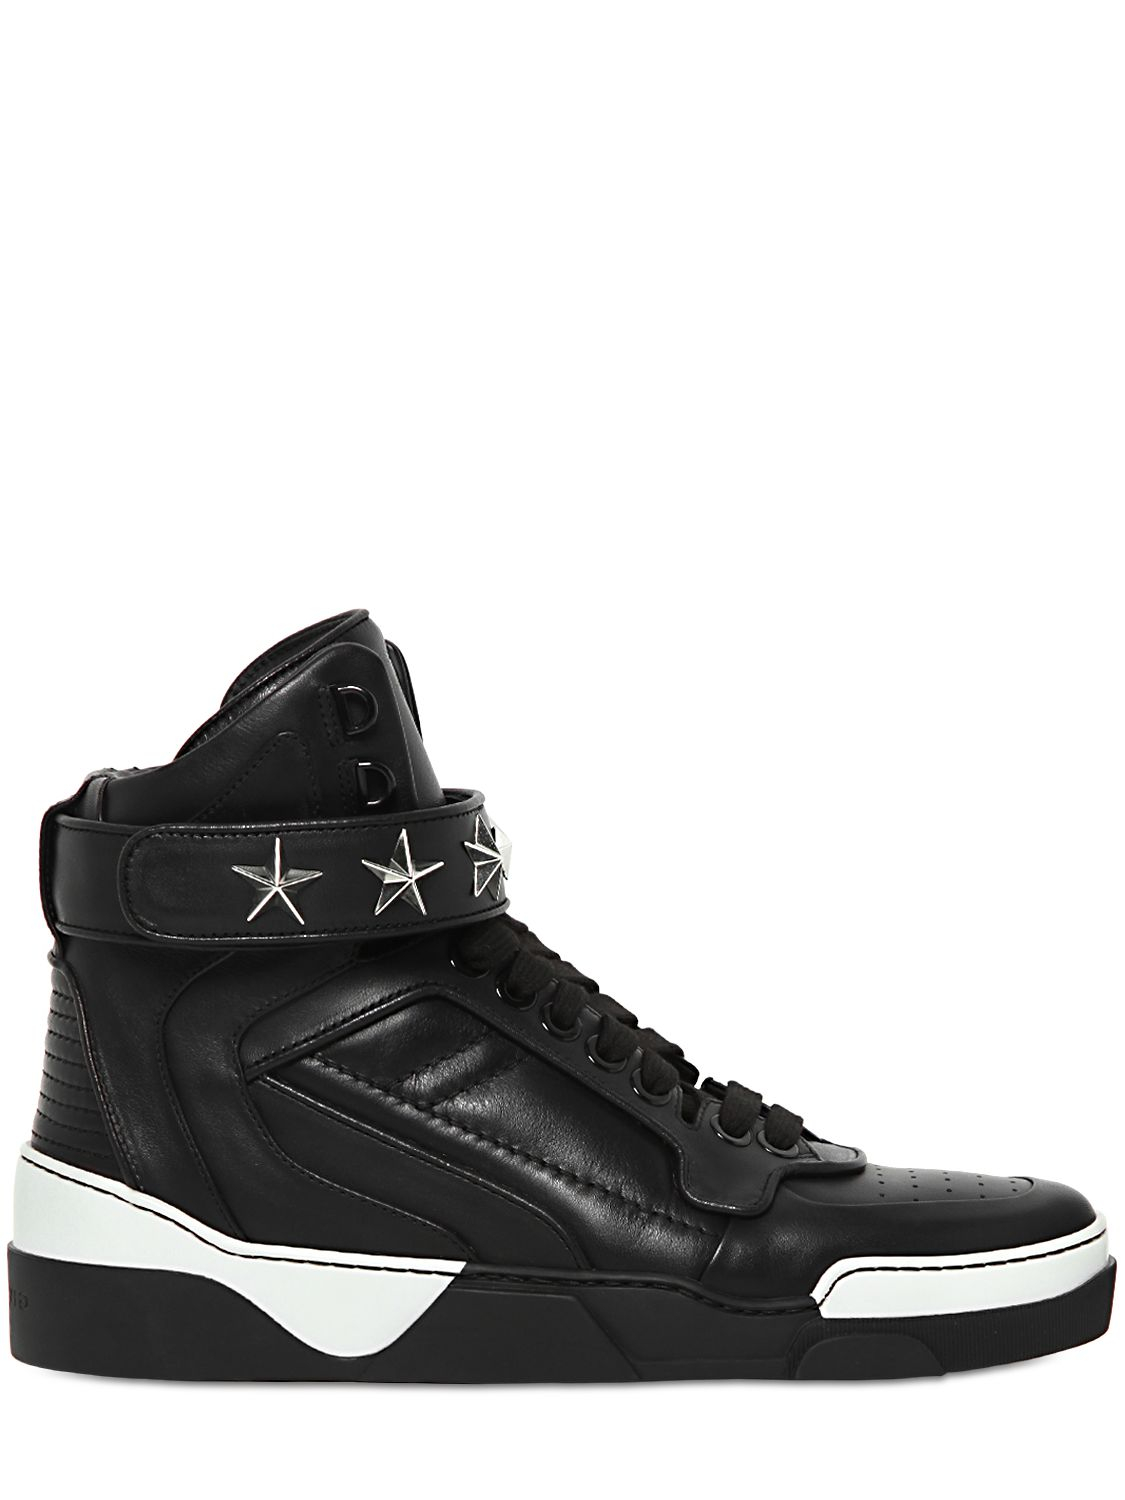 Givenchy Tyson Two Tone Leather High Top Sneakers in Black for Men - Lyst